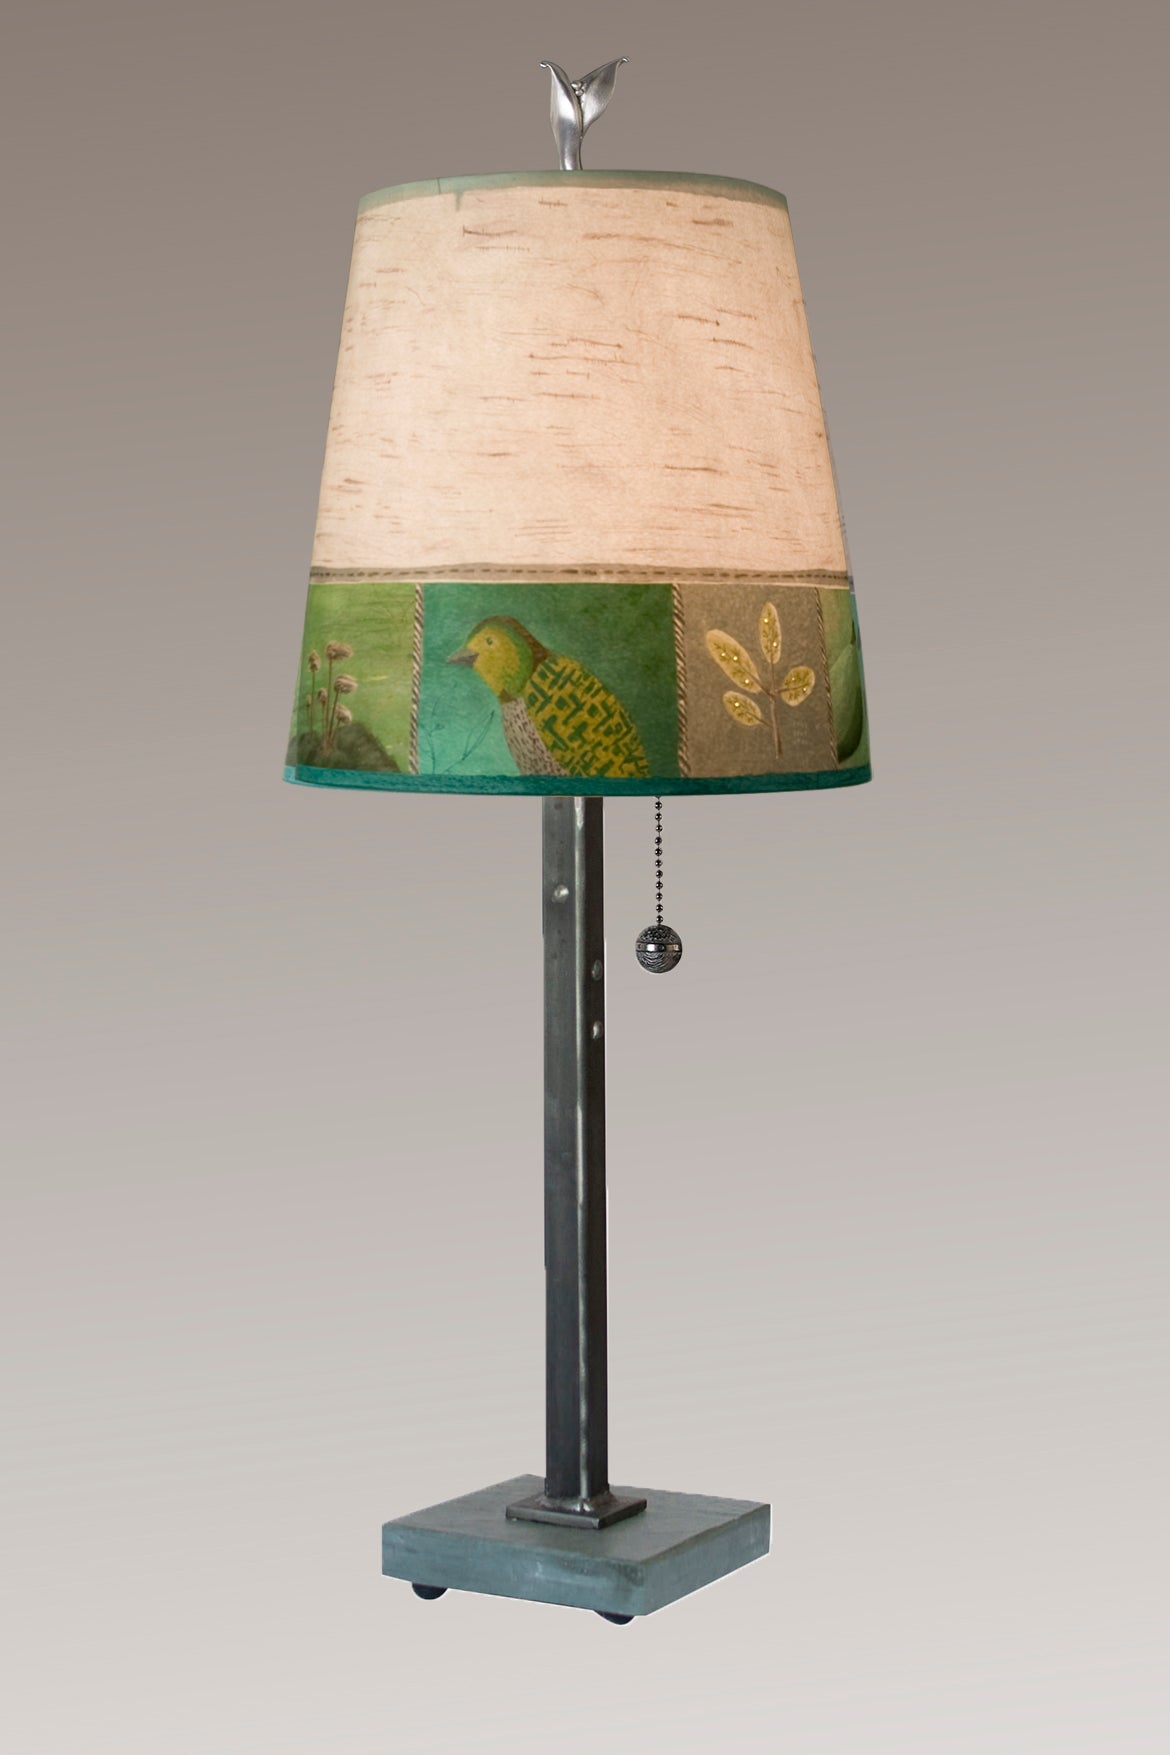 Janna Ugone & Co Table Lamps Steel Table Lamp with Small Drum Shade in Woodland Trails in Birch